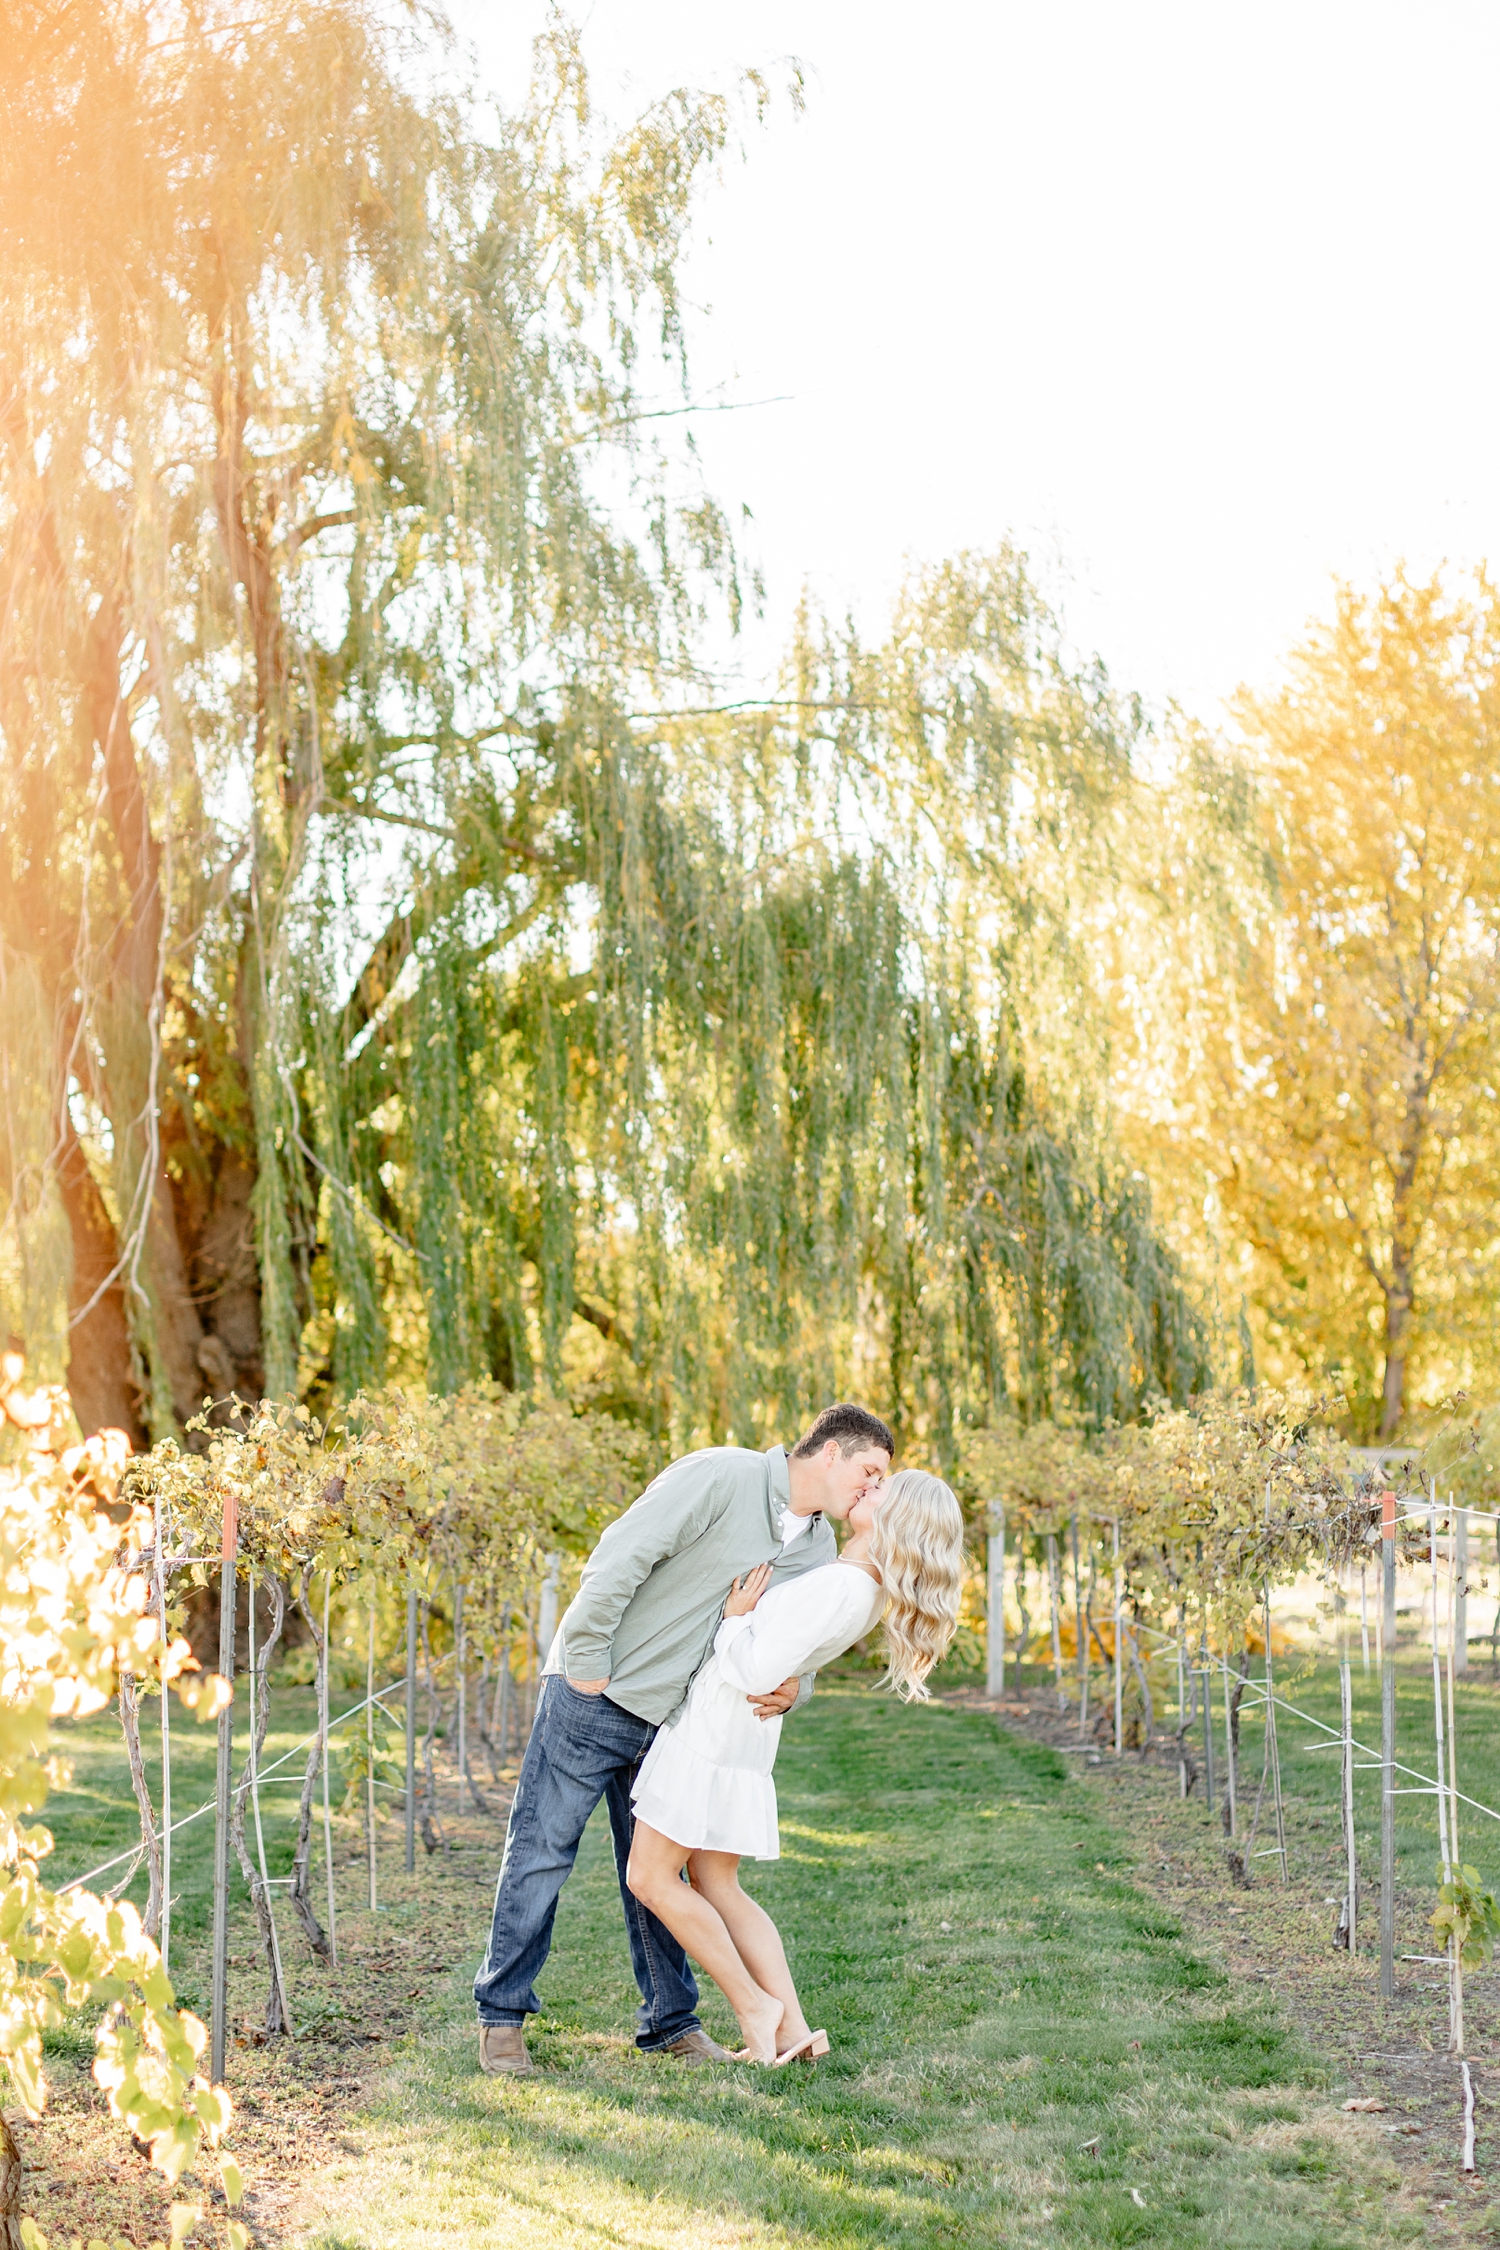 Reed dips Nicole for a kiss in between grape rows at River Vally Orchards & Winery | CB Studio